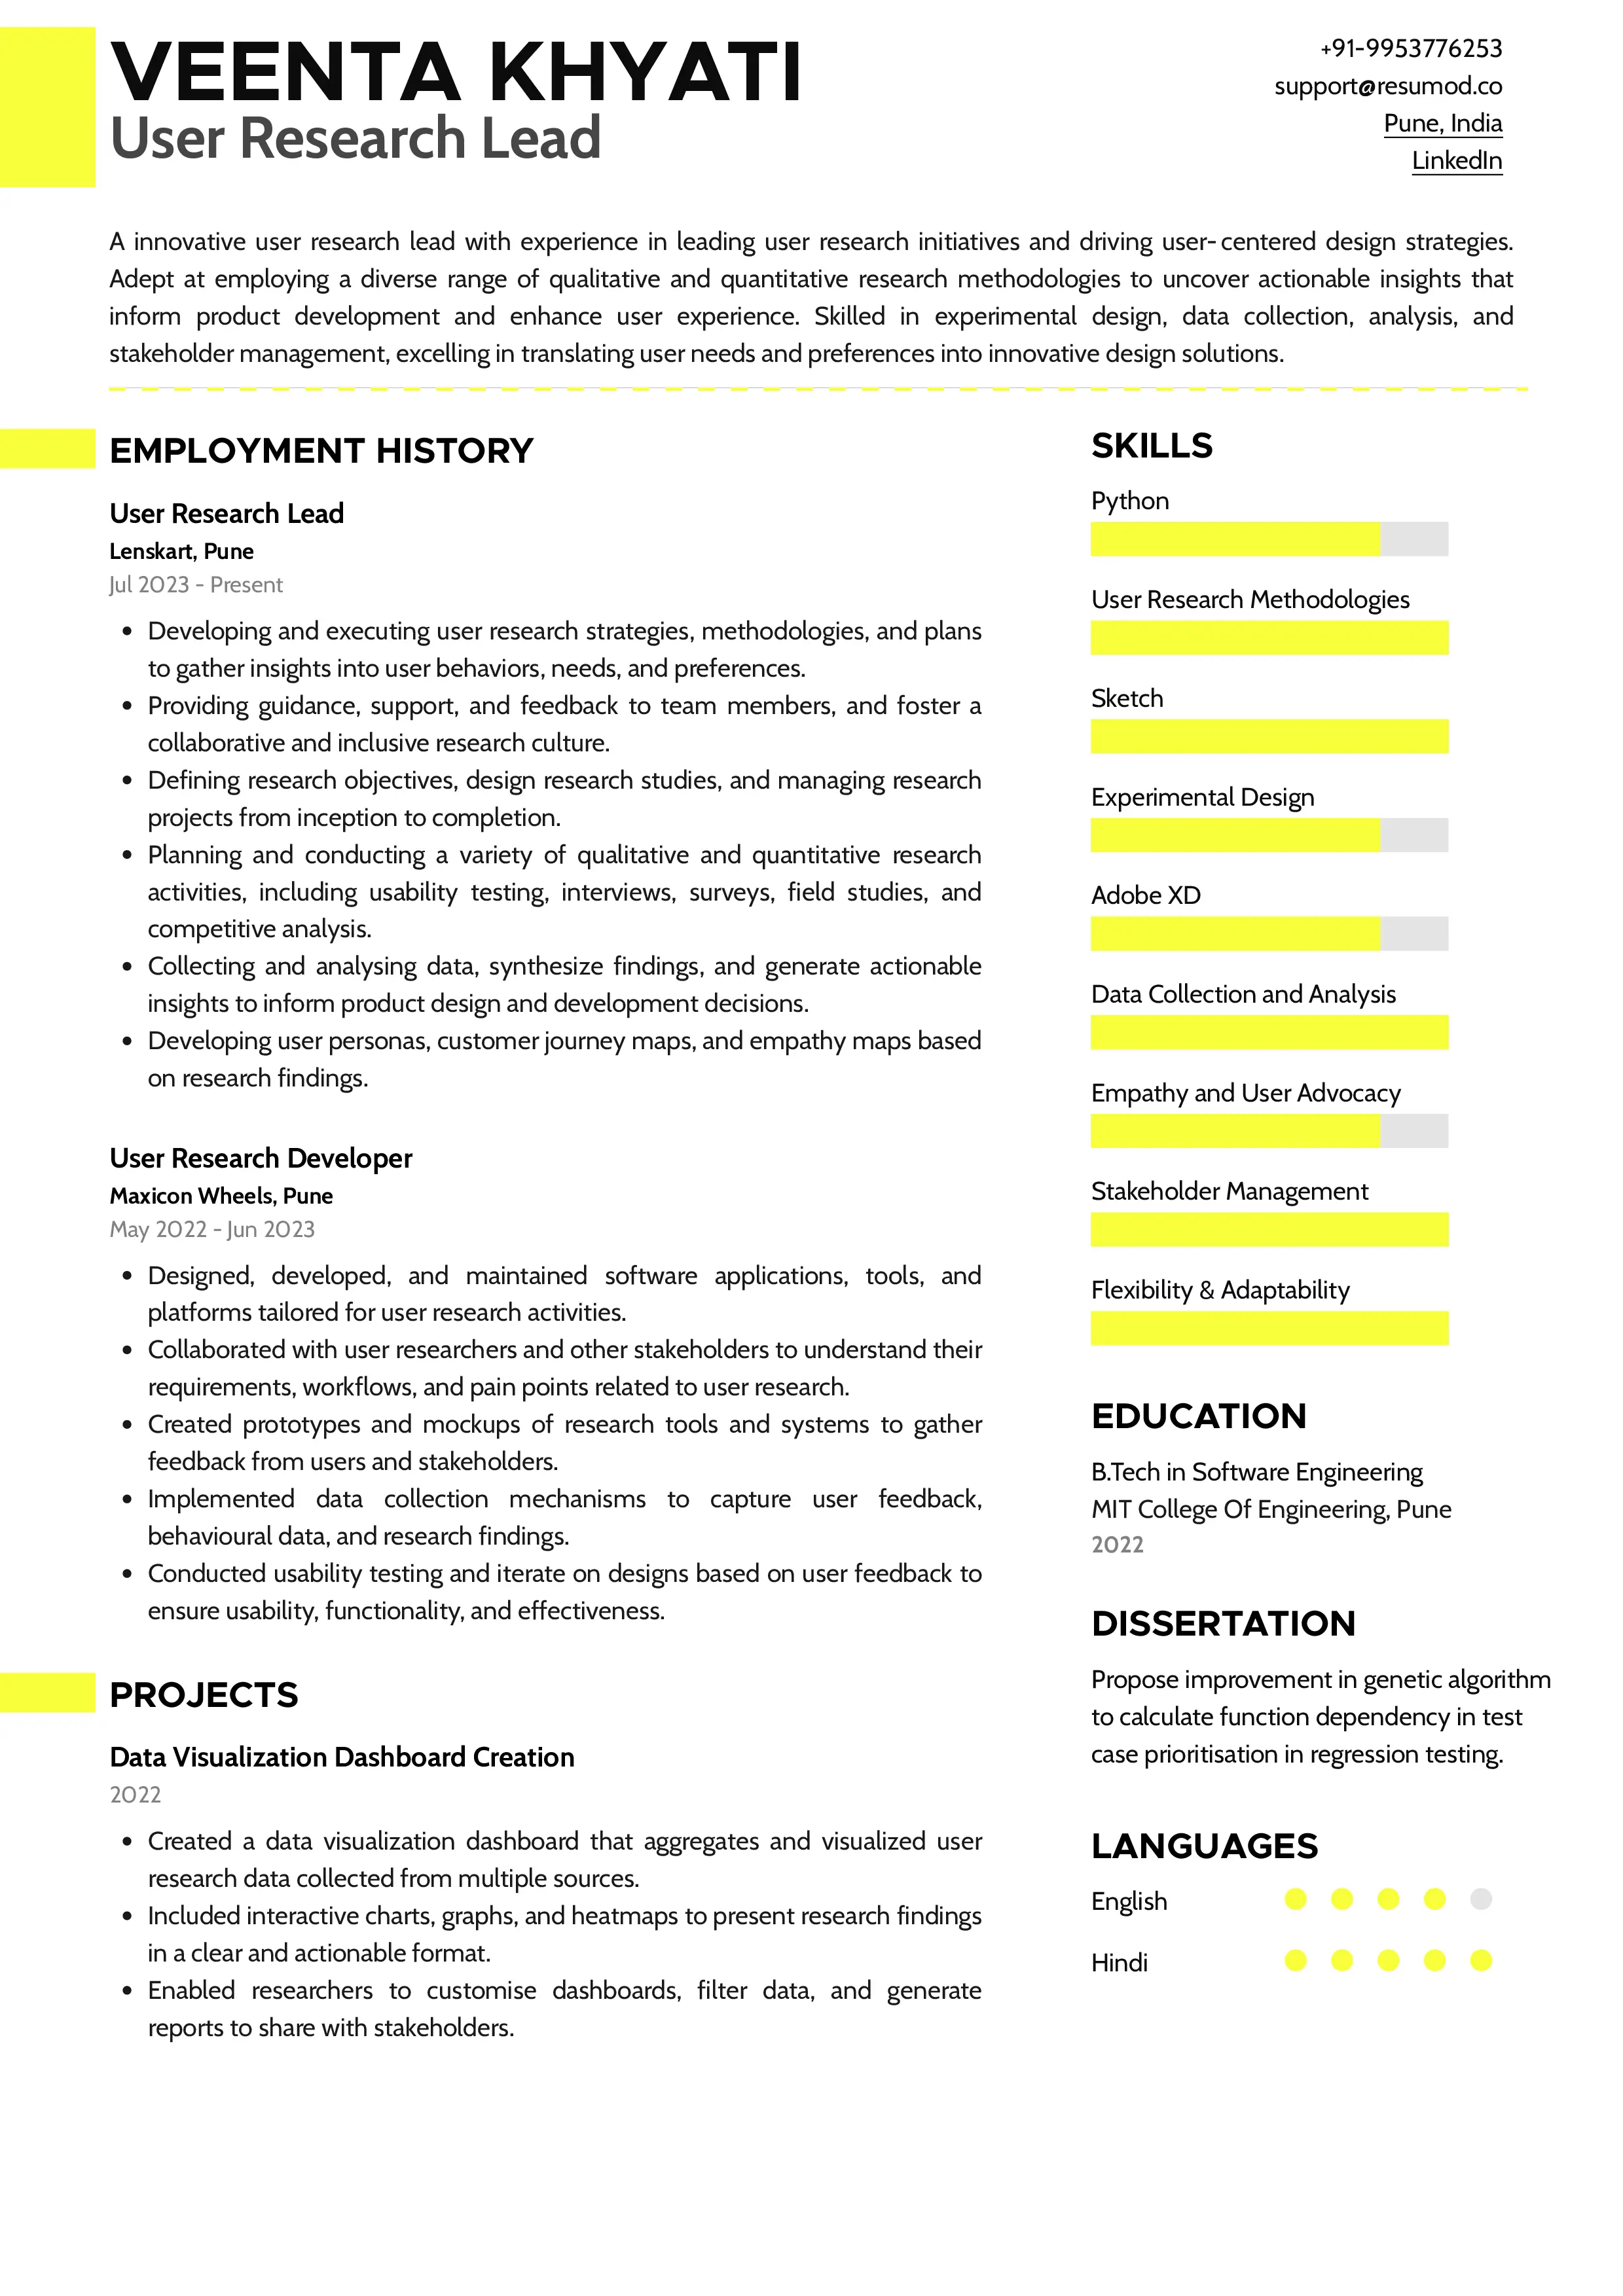 Sample Resume of User Research Lead | Free Resume Templates & Samples on Resumod.co